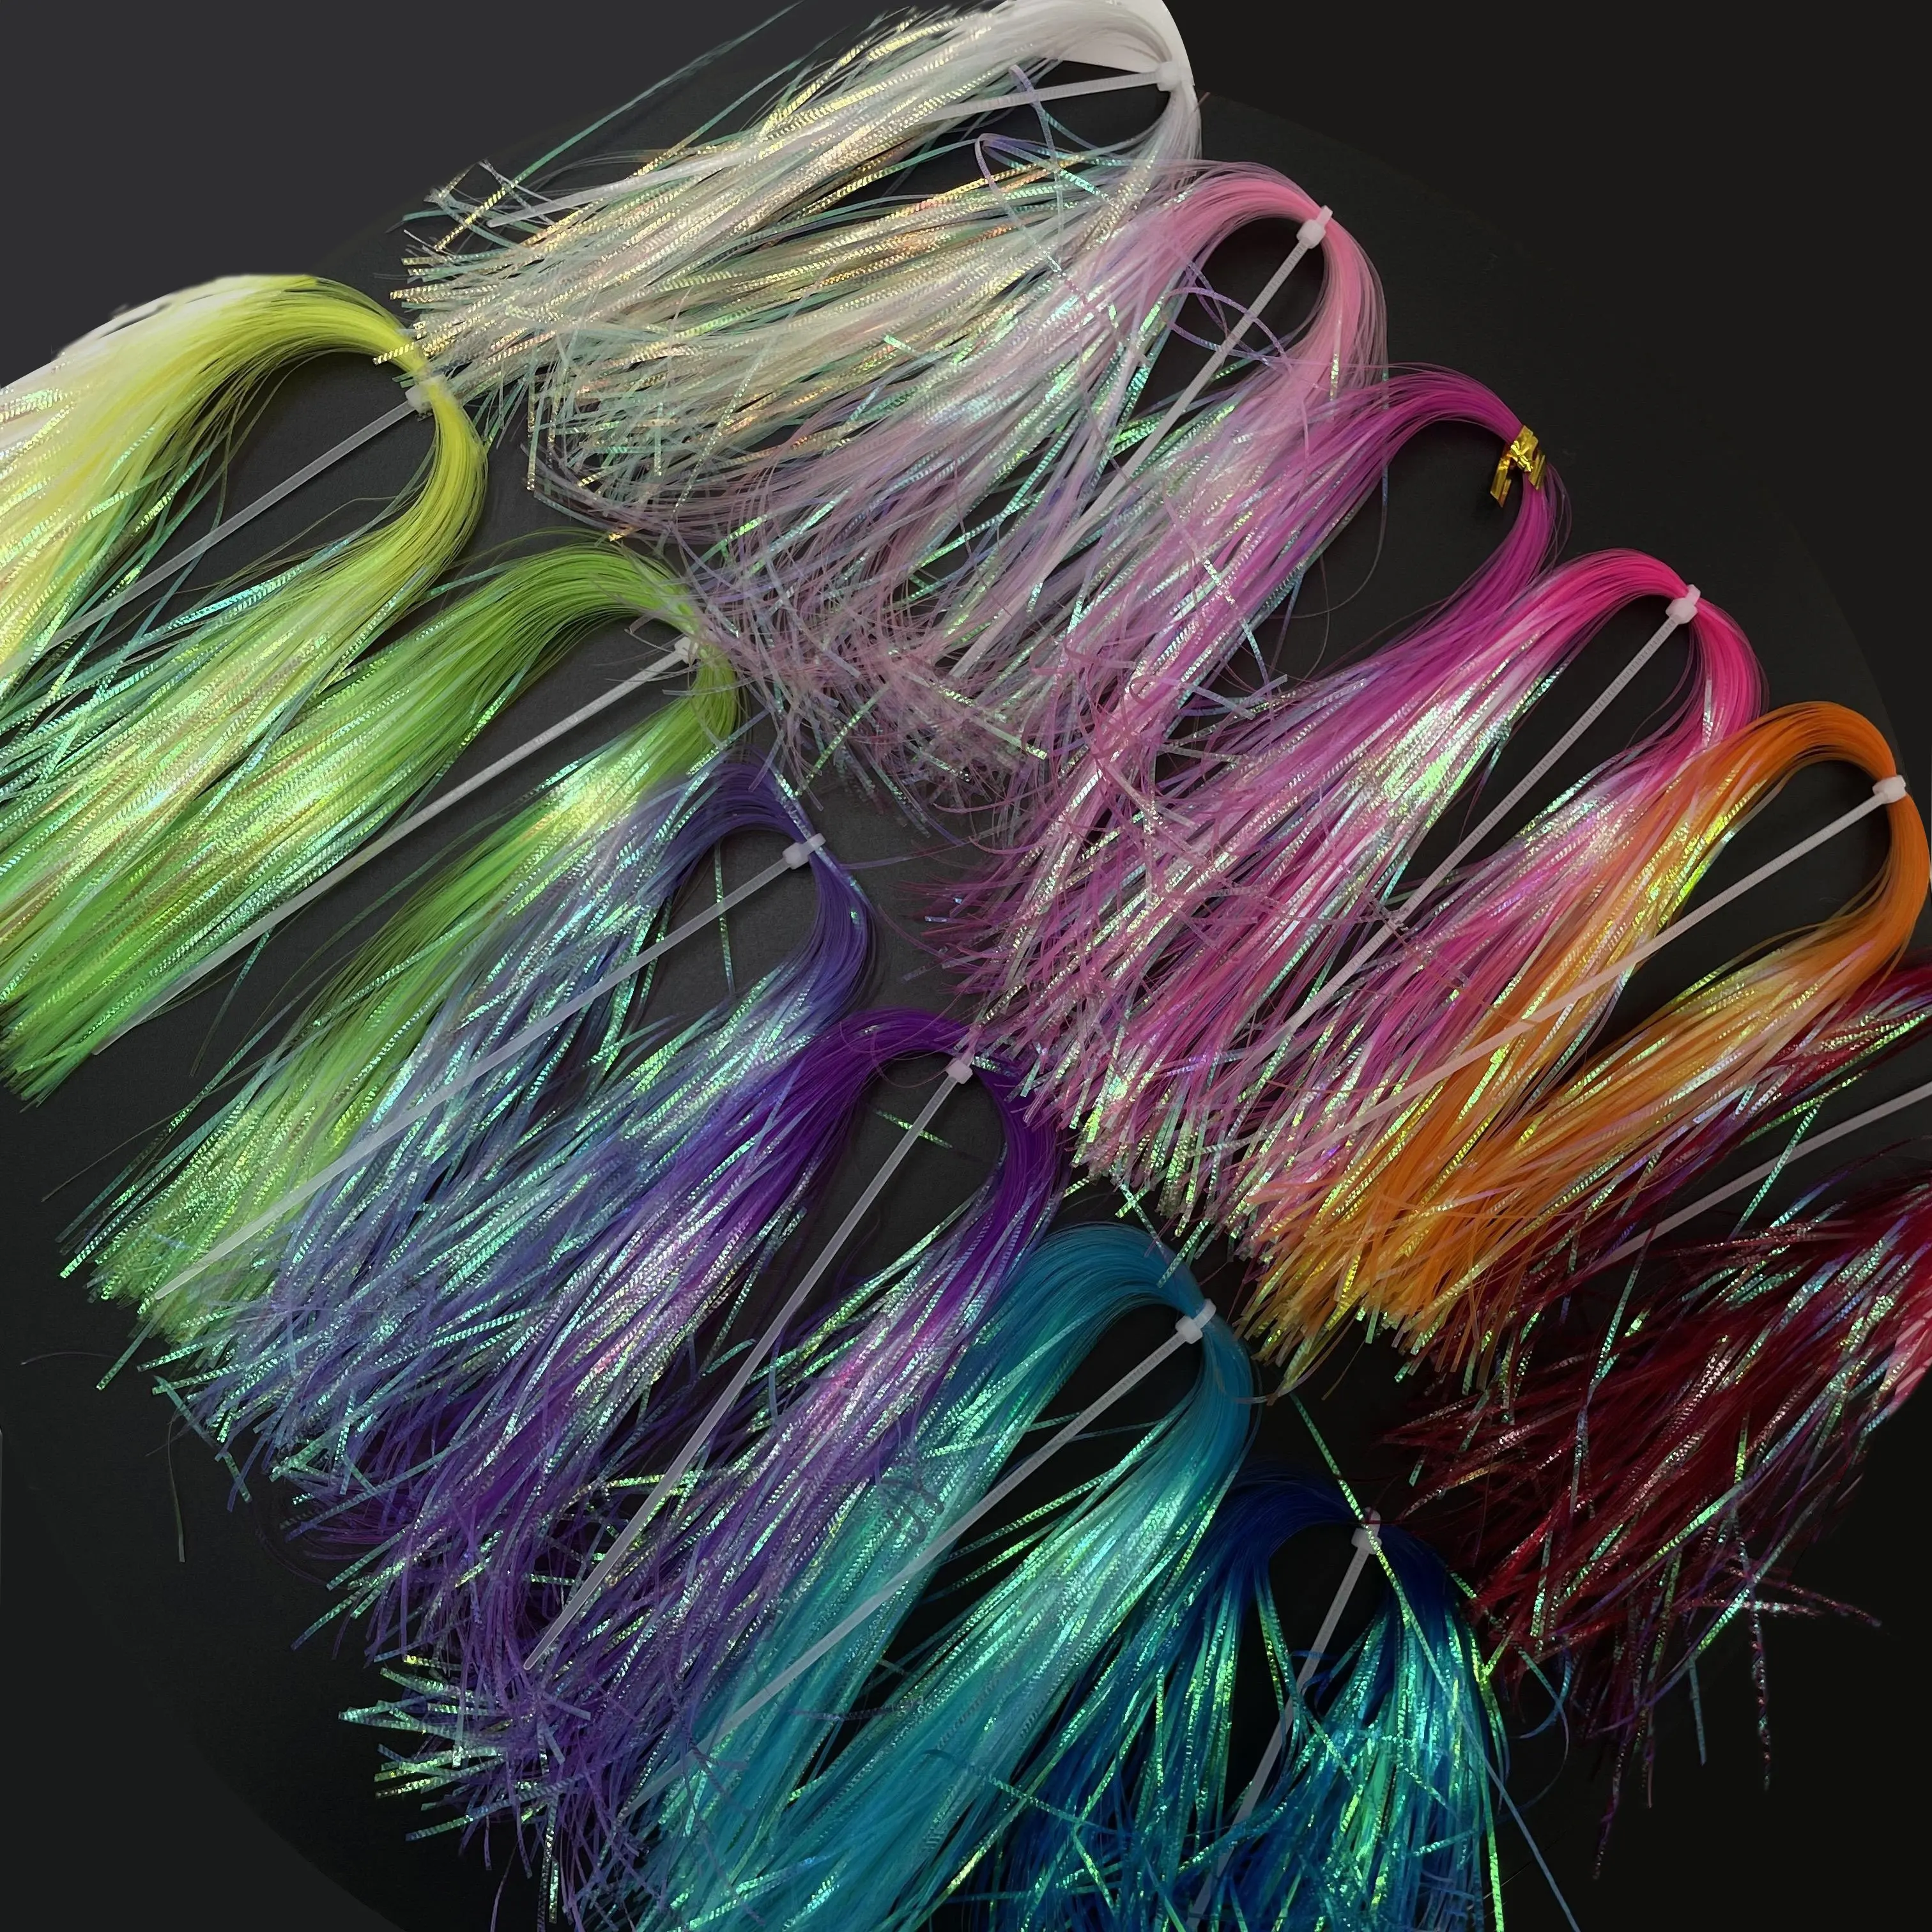 in stock Fishscale 12 colors fly tying krinkle flash fly tying materials Crinkle Flash fly tying Wing Leg Material